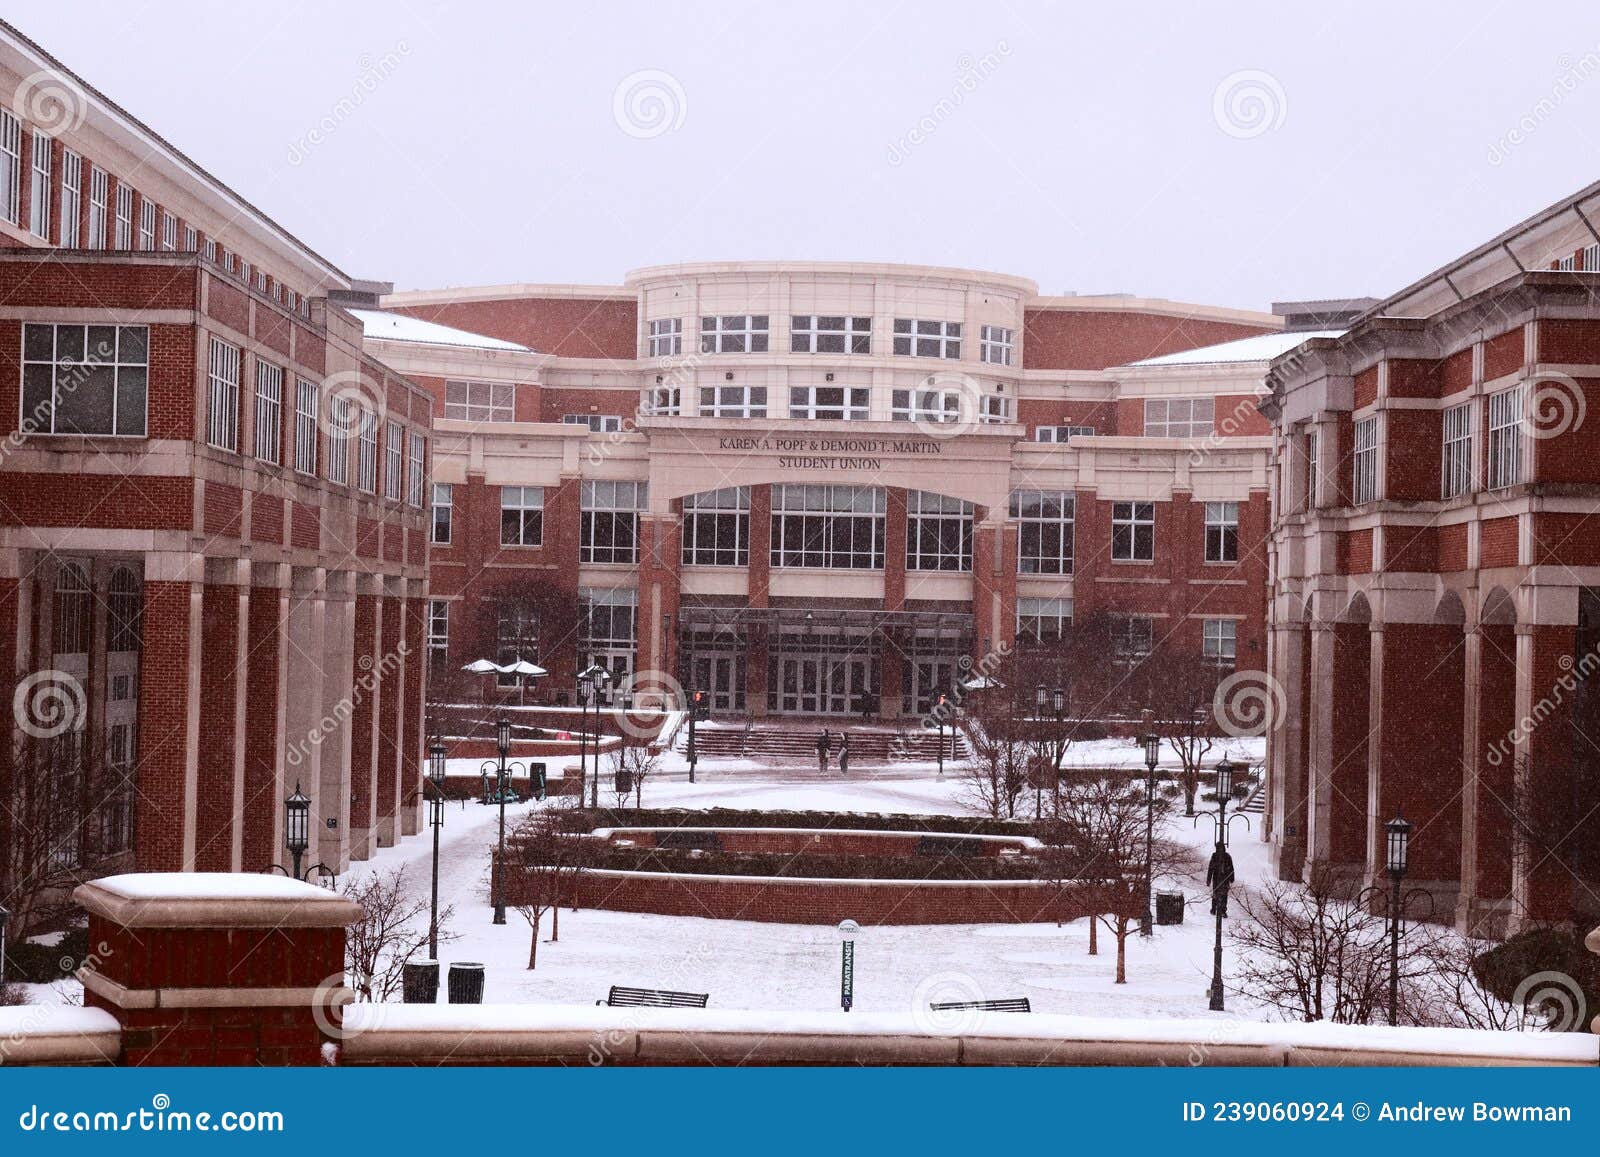 the popp martin student union at unc charlotte in the snow